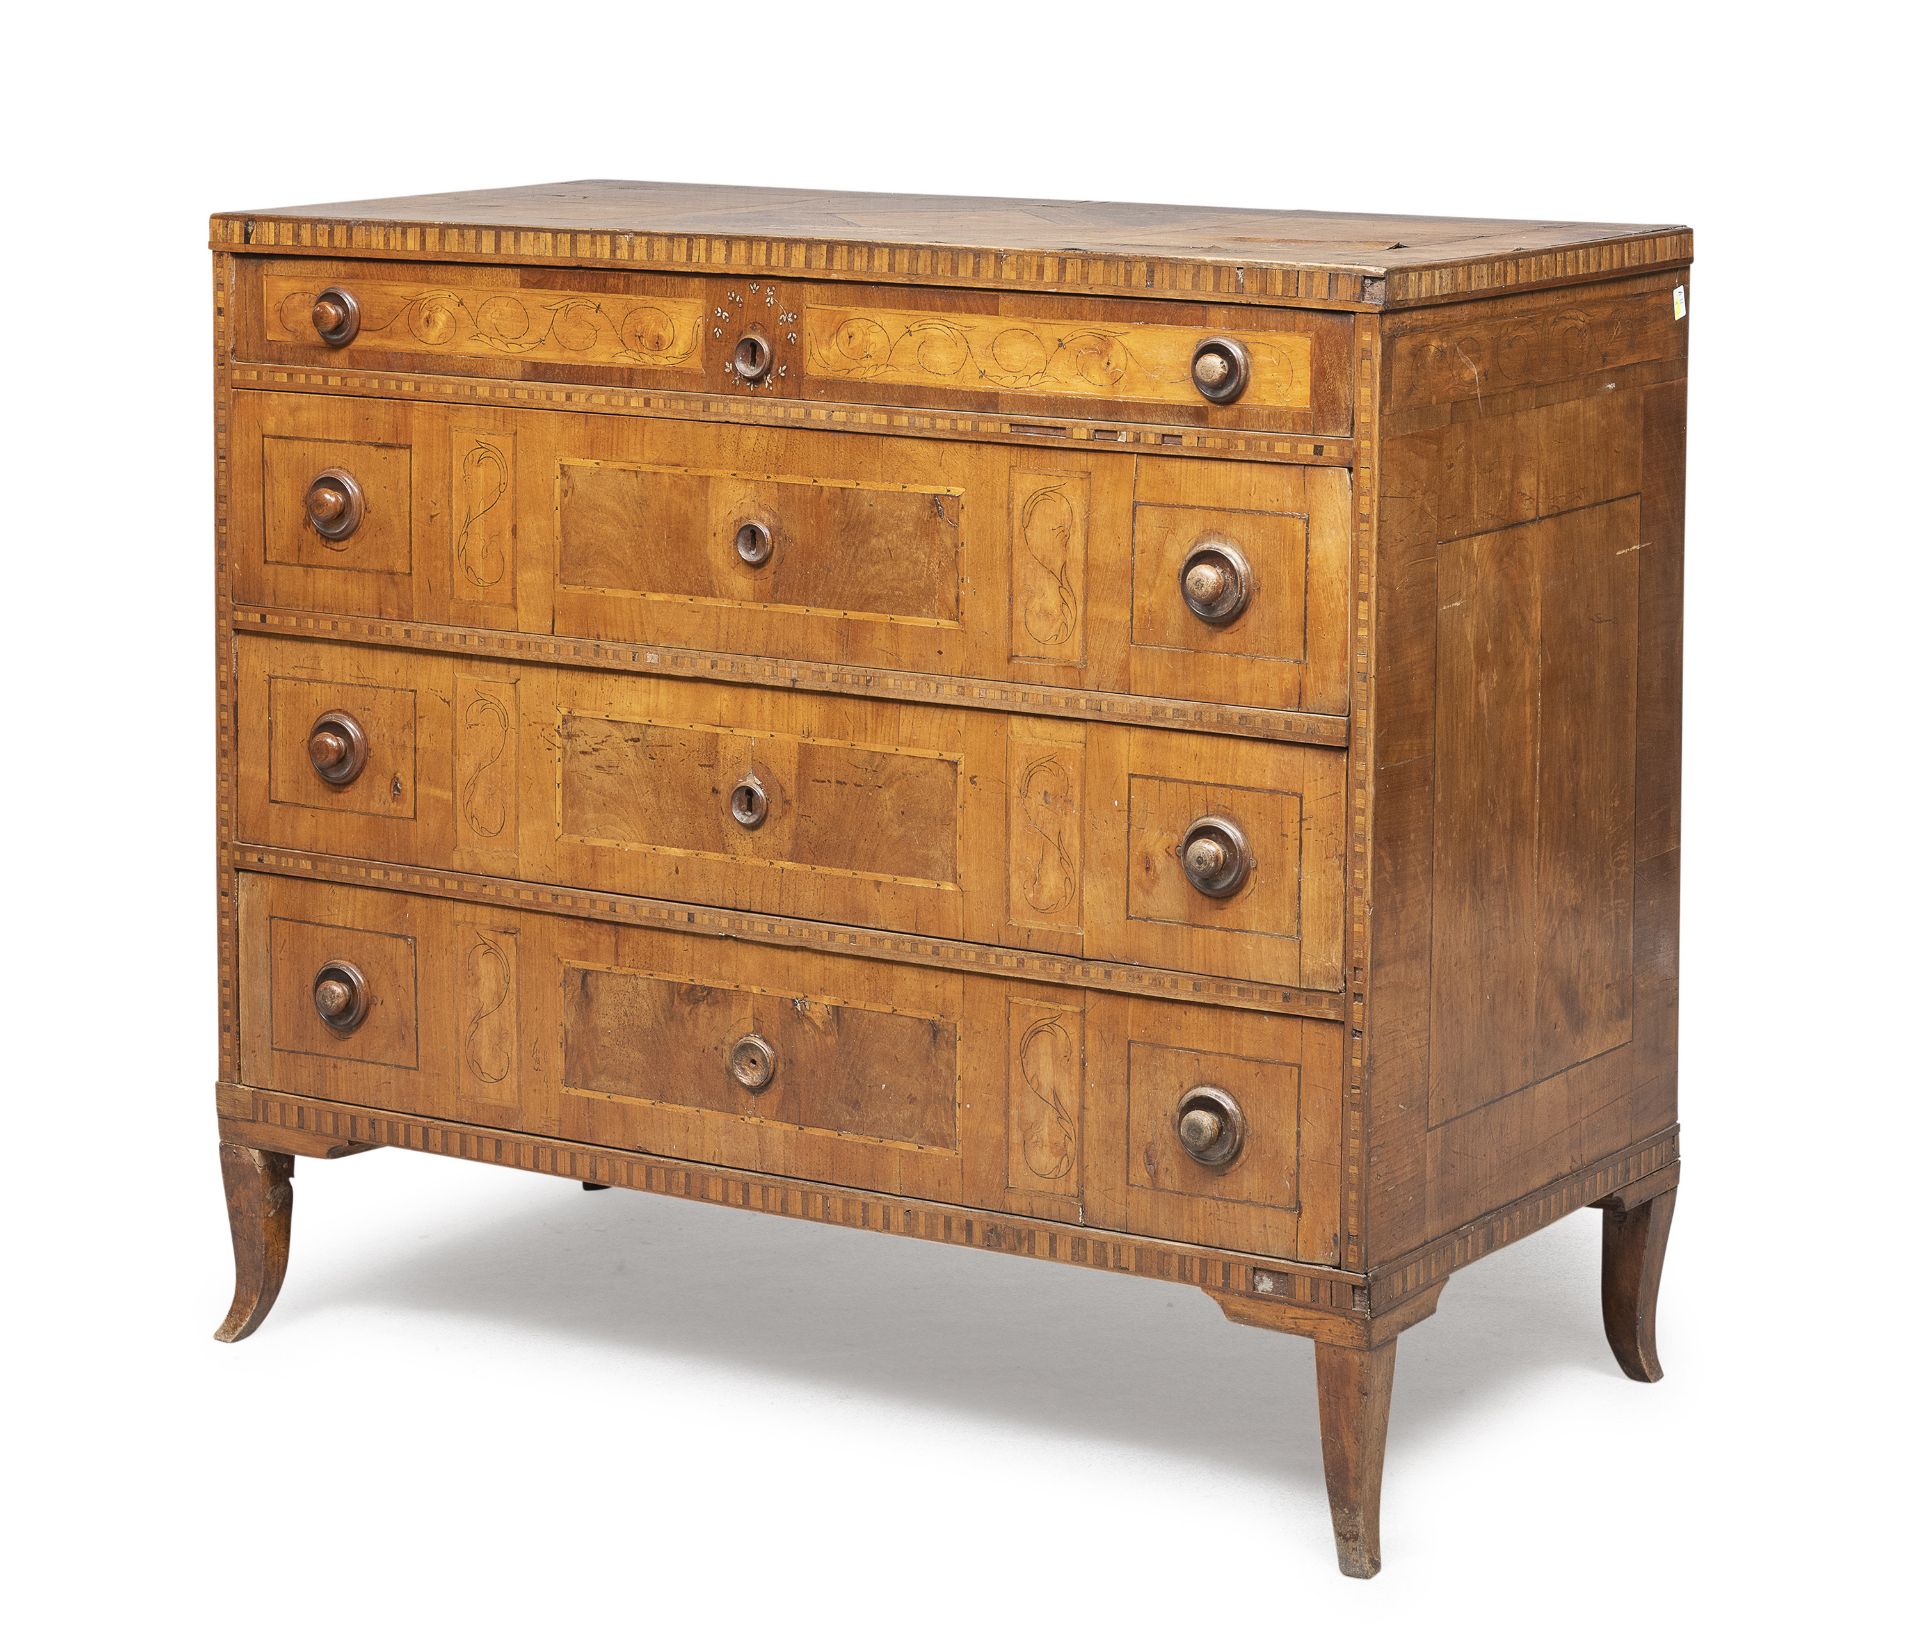 CHERRY AND WALNUT COMMODE EMILIA END OF THE 18TH CENTURY